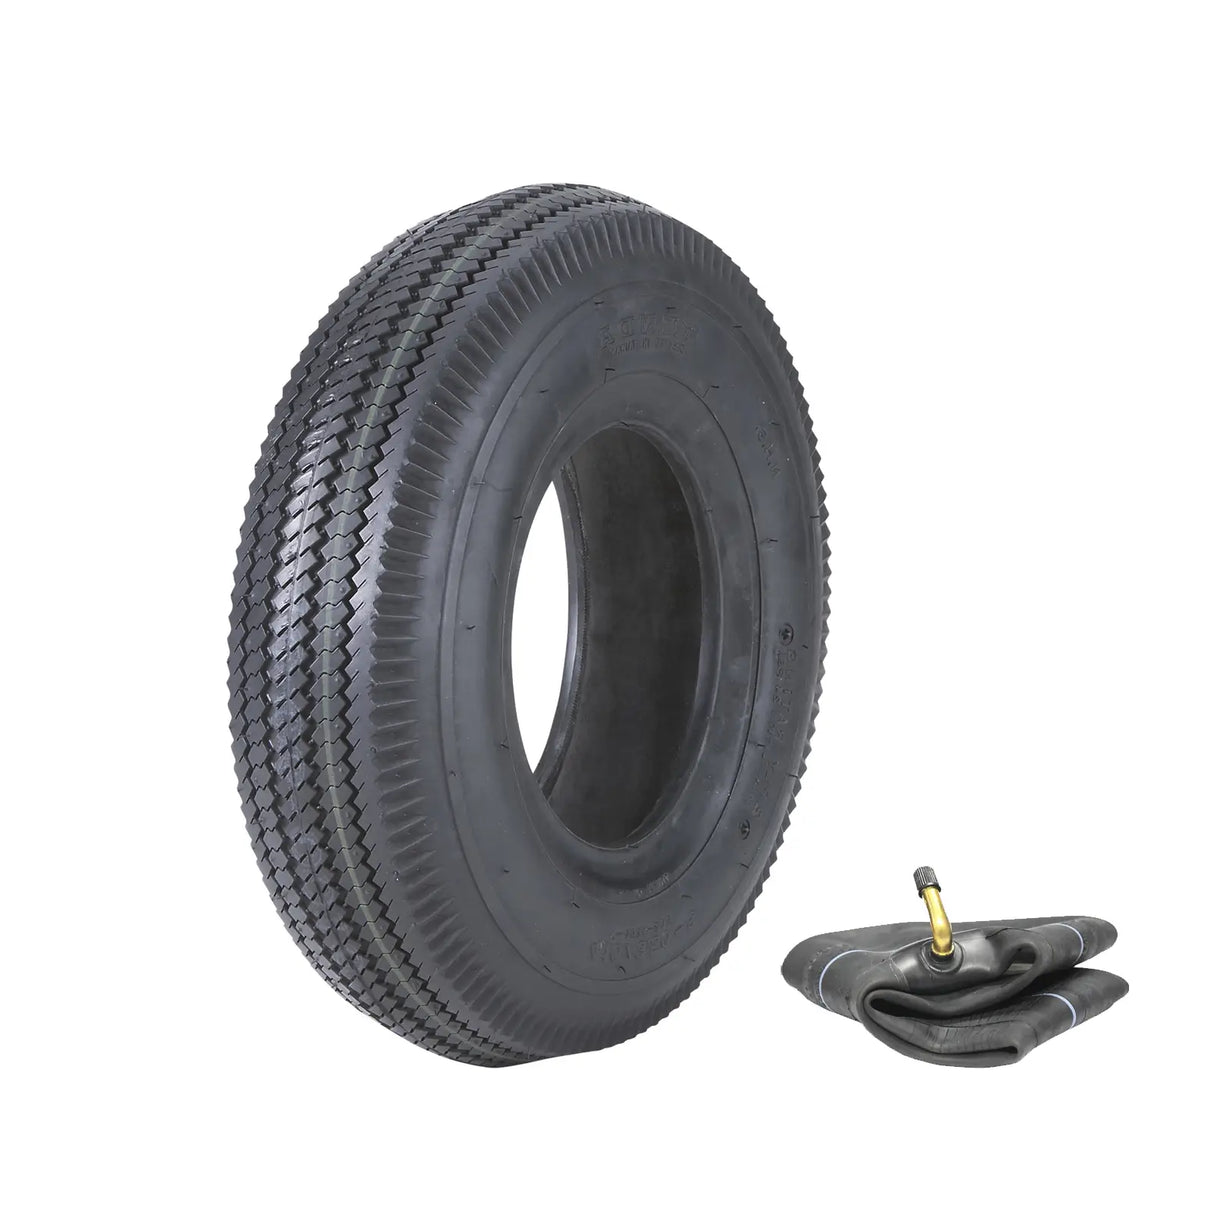 4.10/3.50-6 (4 PLY) K353A Kenda Highway Tyre and Tube